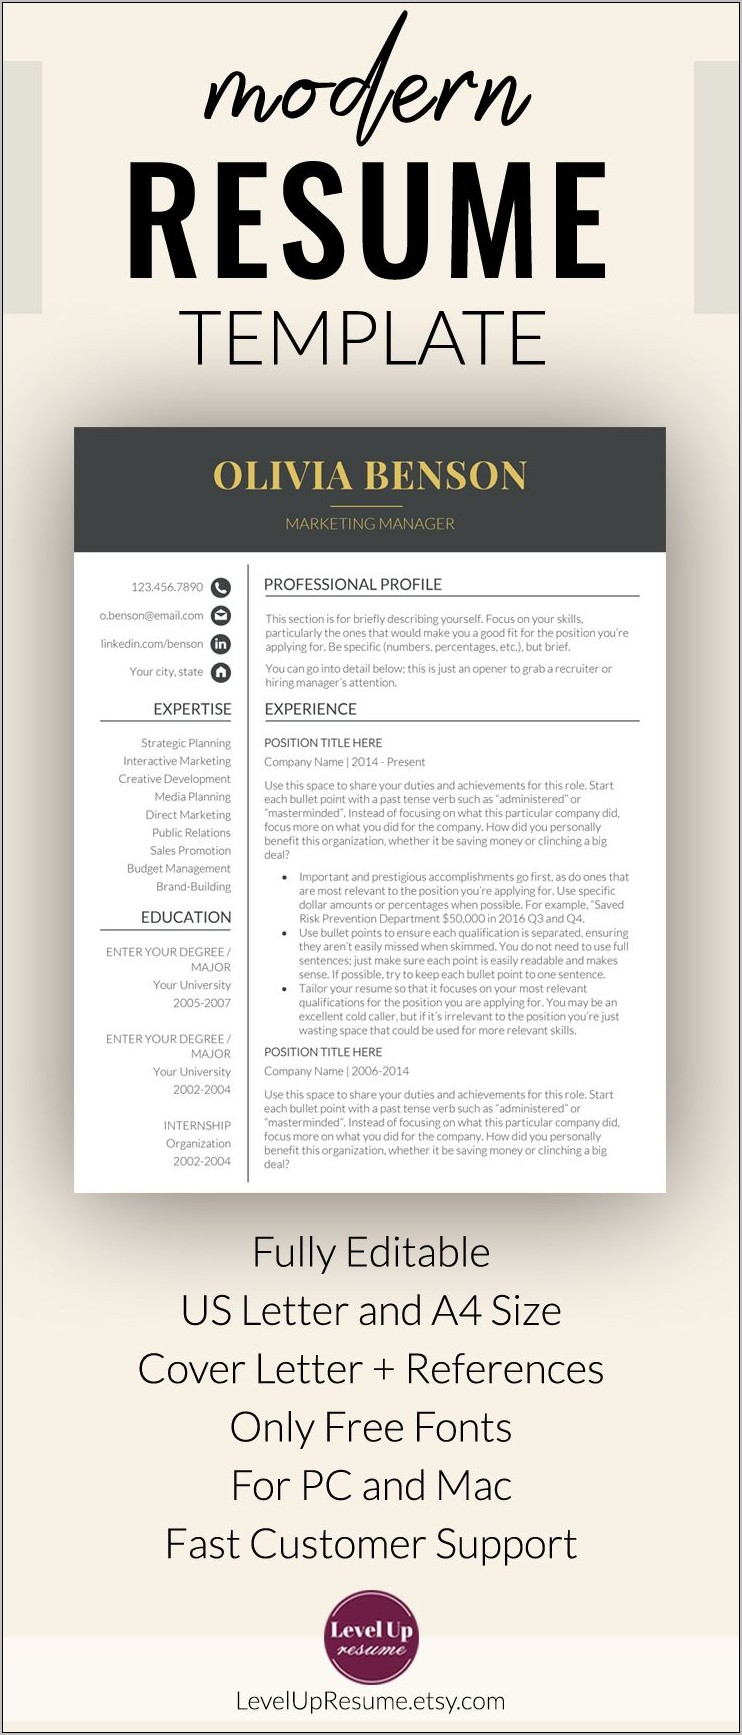 Professional Resume Template For Microsoft Word